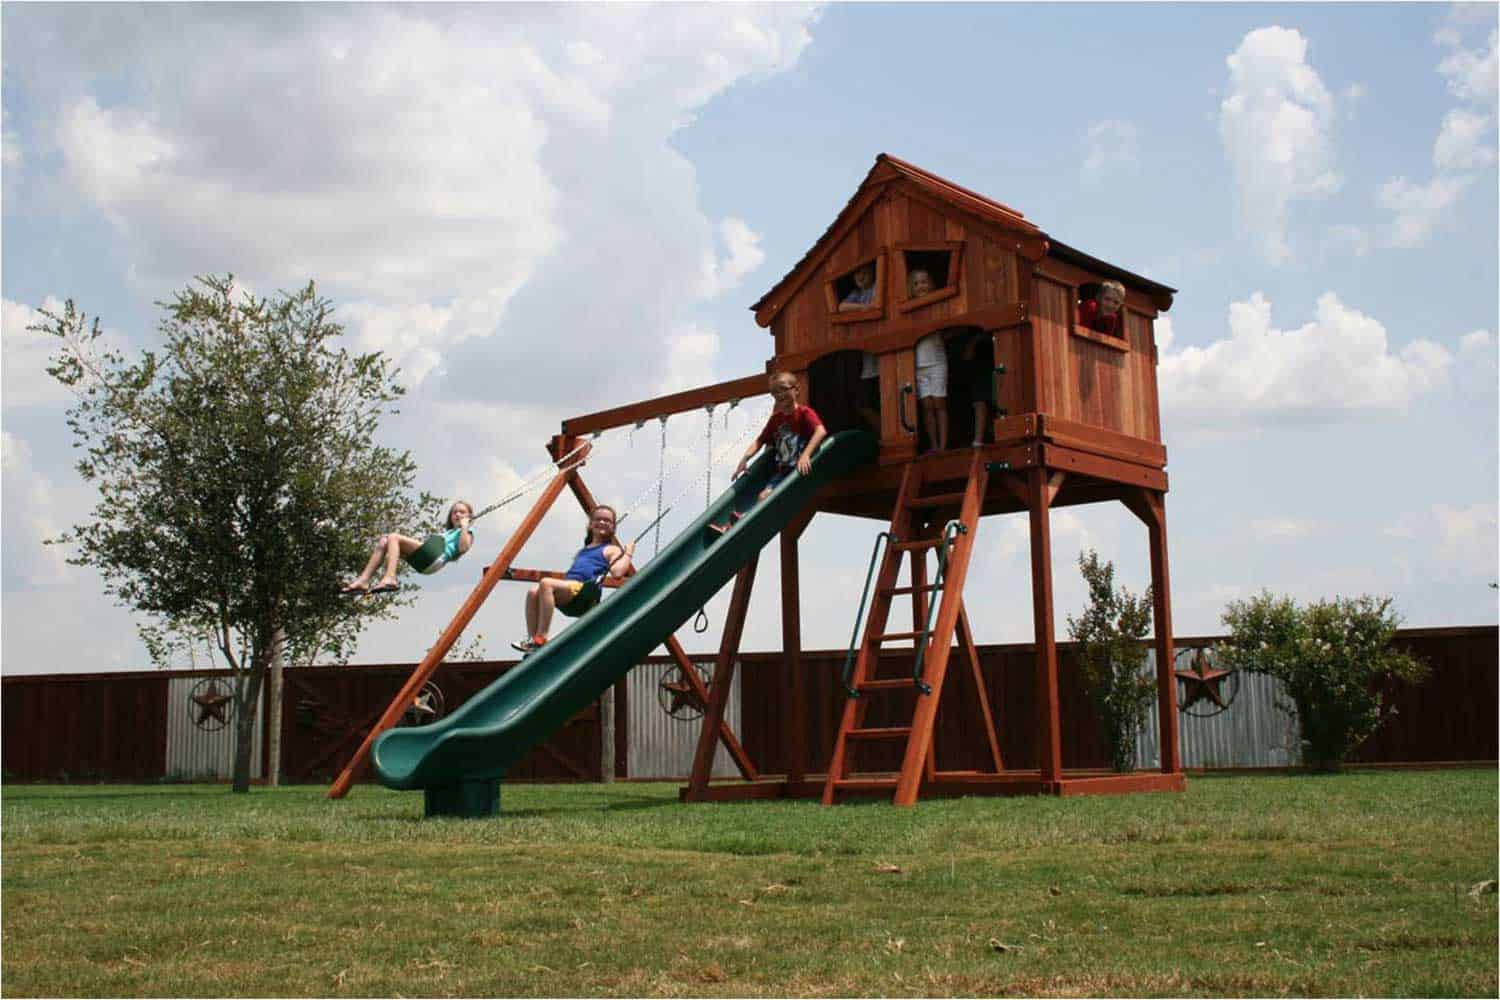 kids redwoood fort with swingset, upper cabin with crooked windows, slide, and deck ladder